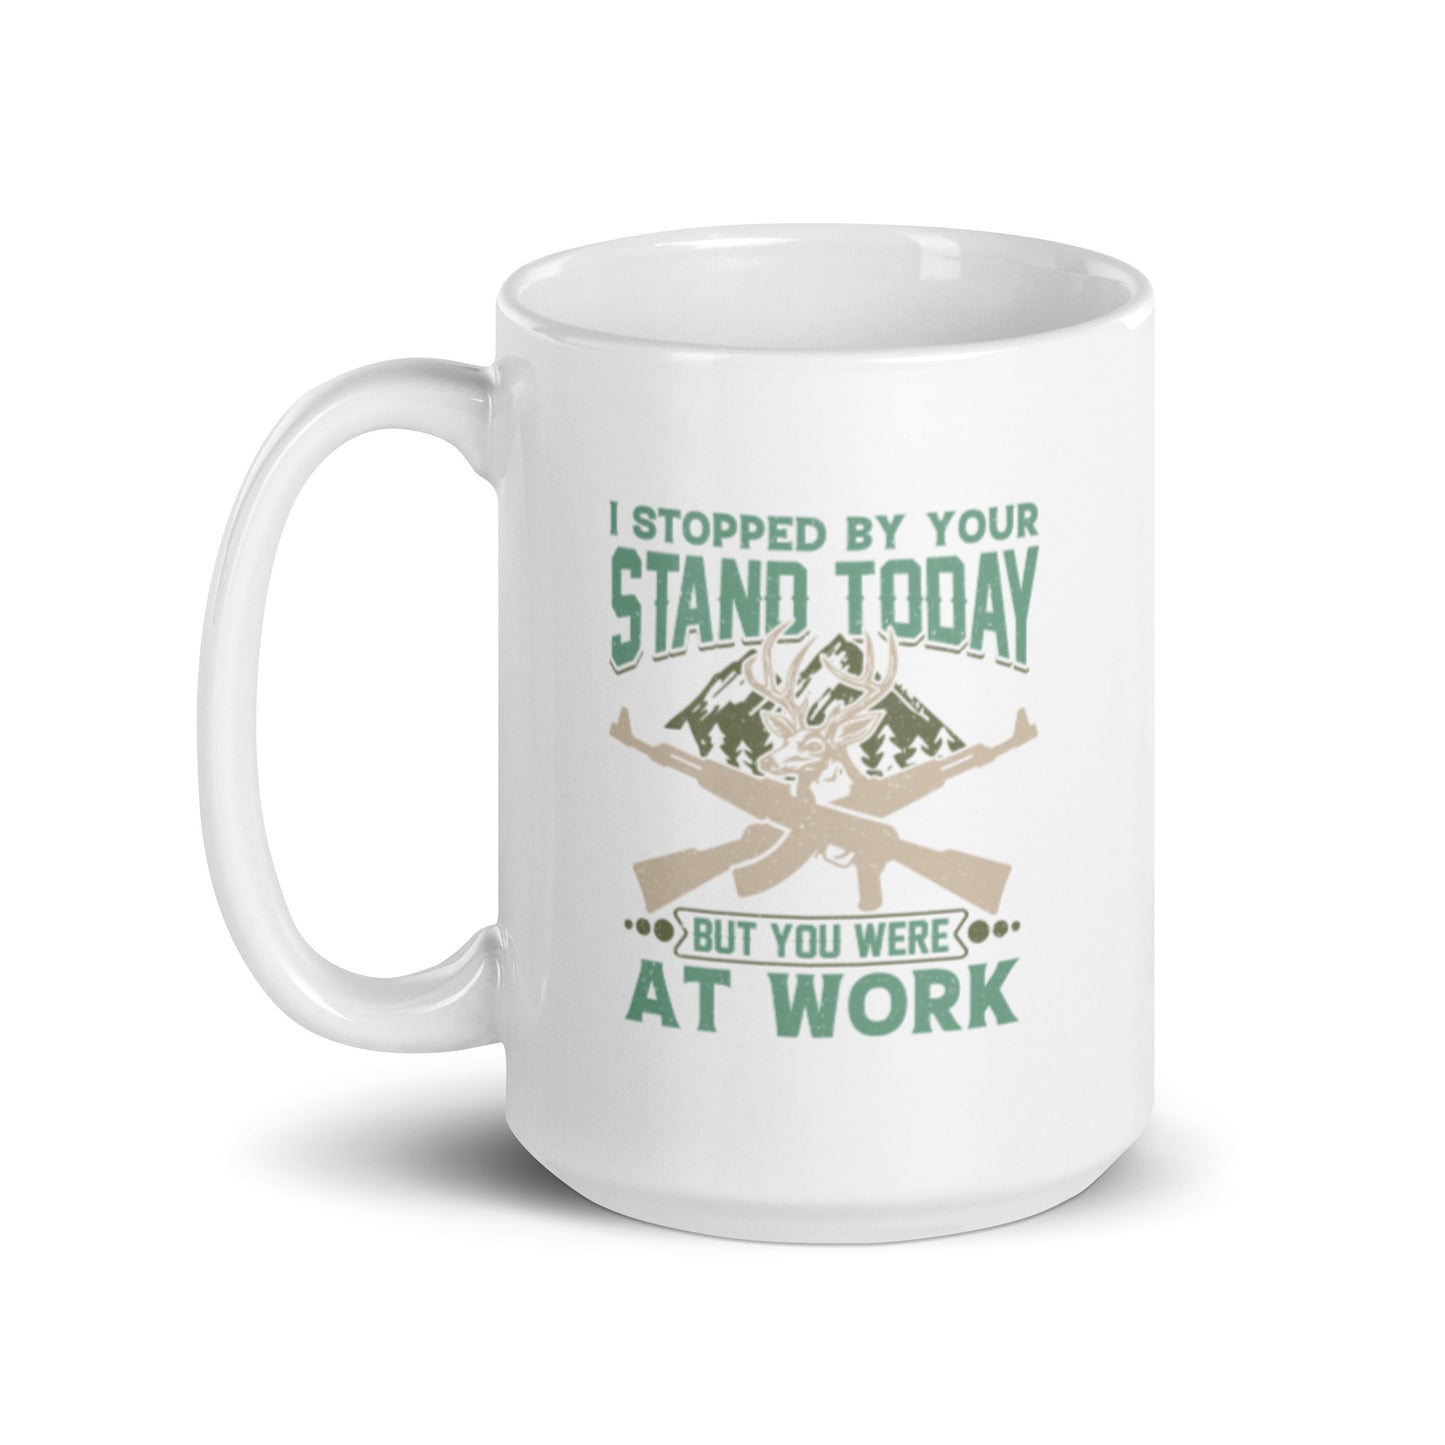 I Stopped by Your Stand Today White glossy mug